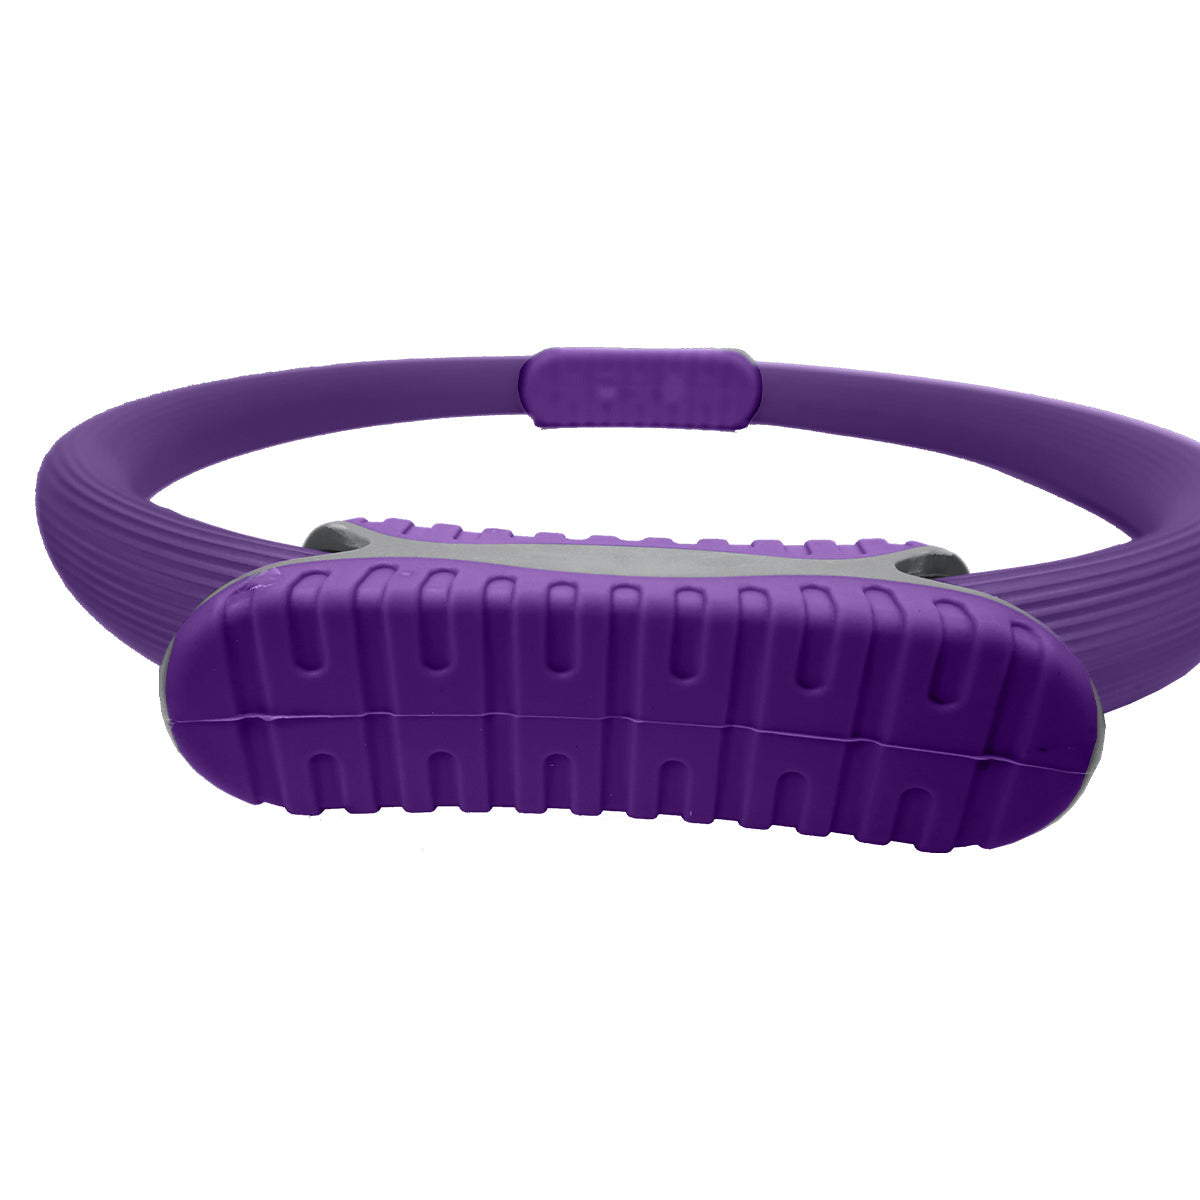 Sports & Fitness > Fitness Accessories - Powertrain Pilates Ring Band Yoga Home Workout Exercise Band Purple